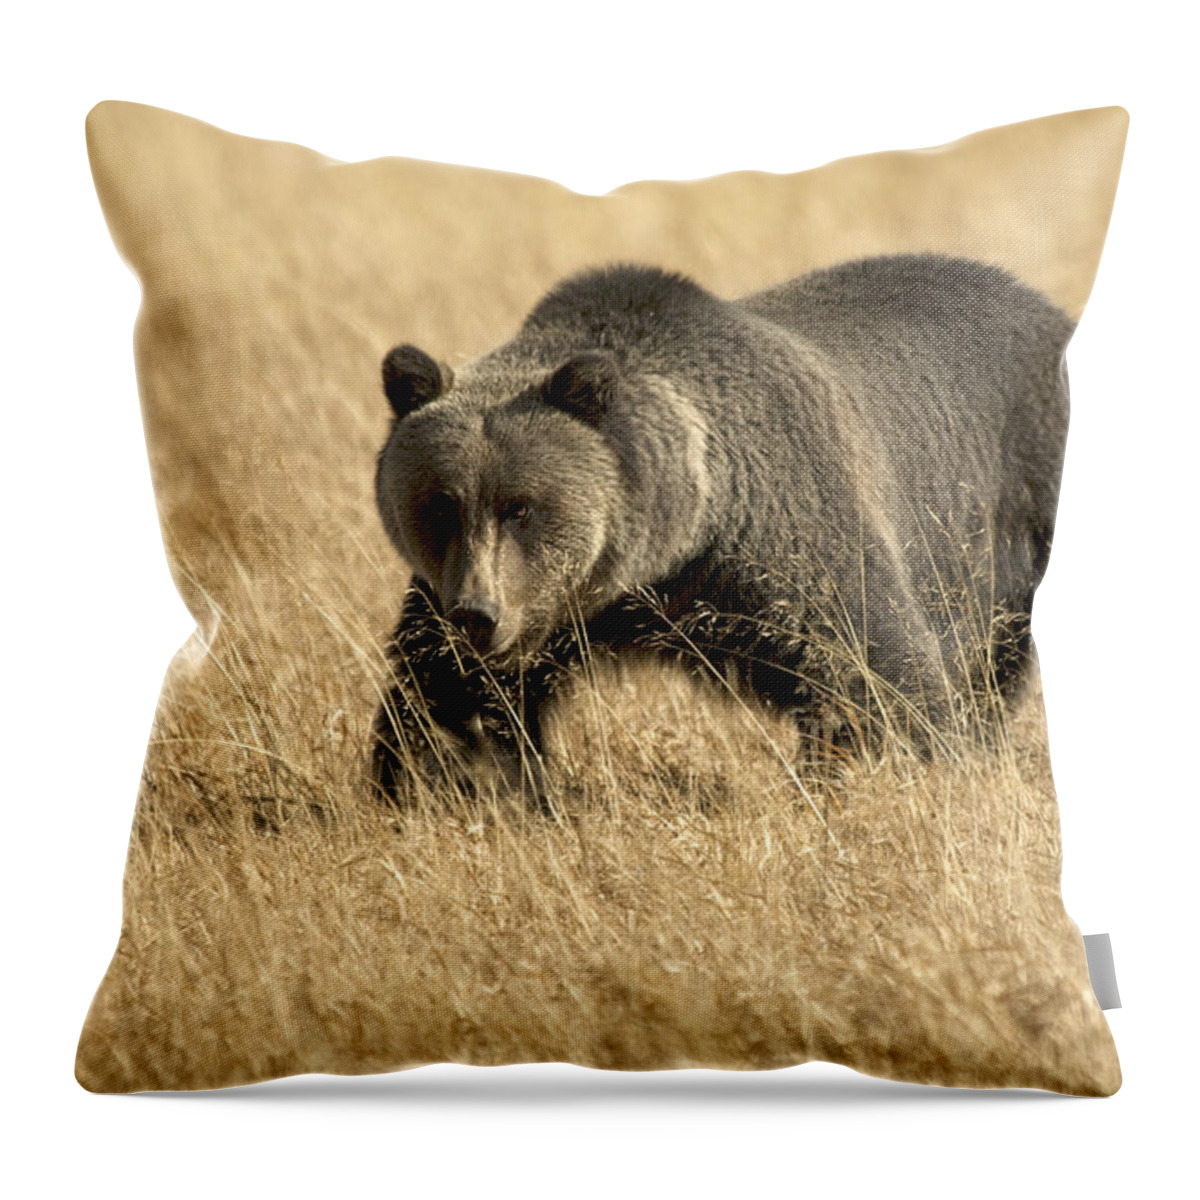 Bear Throw Pillow featuring the photograph Bear On The Prowl by Gary Beeler